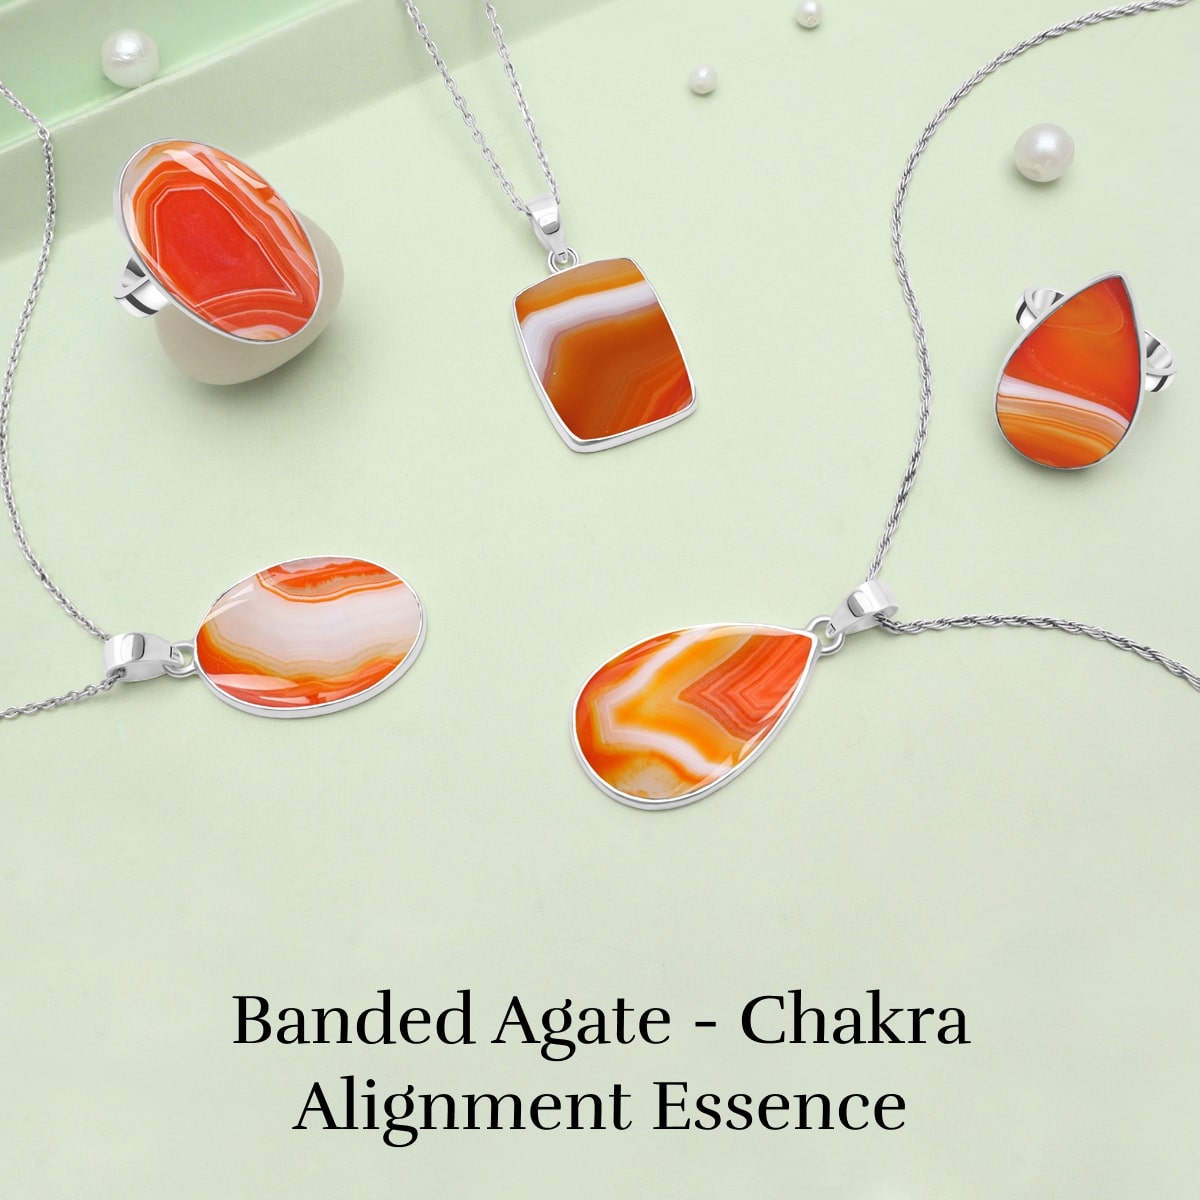 Banded Agate & Its Chakra Association